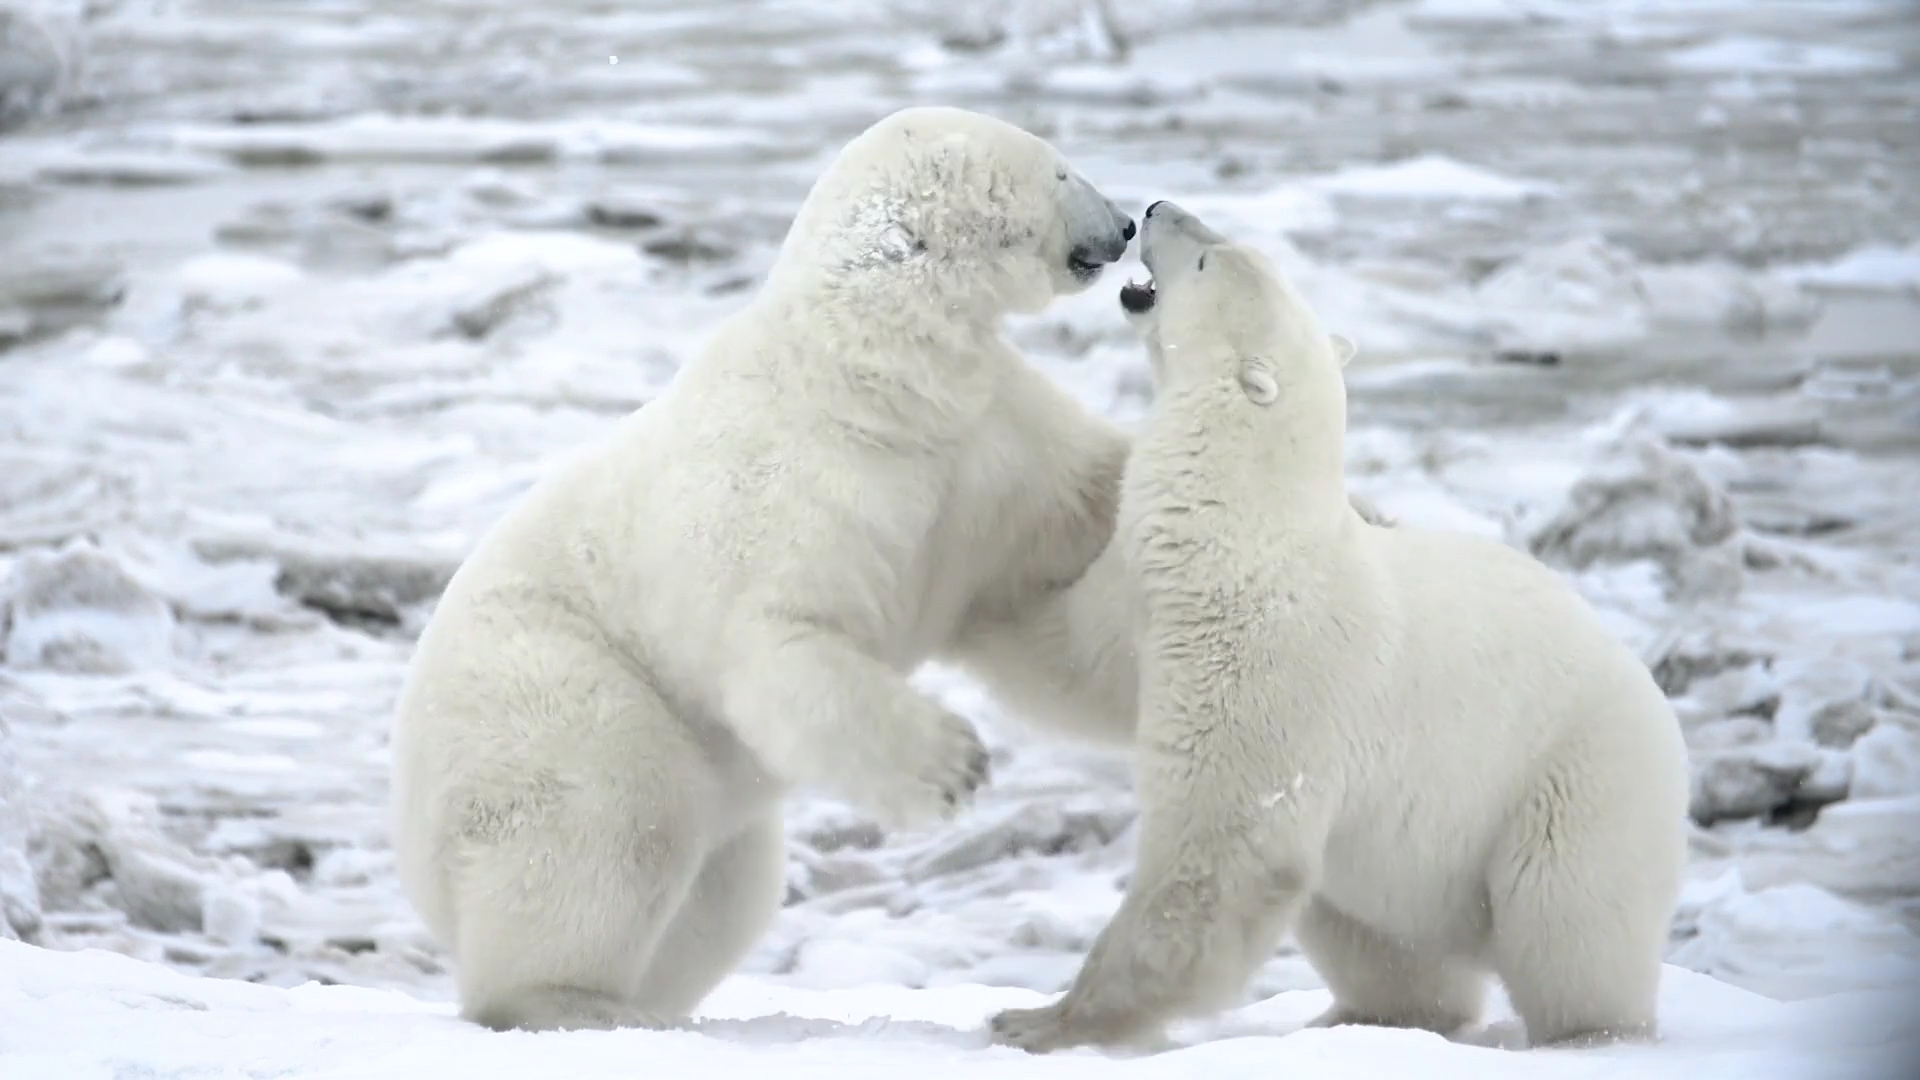 Sparring bears. Seal River Heritage Lodge. Build Films photo.